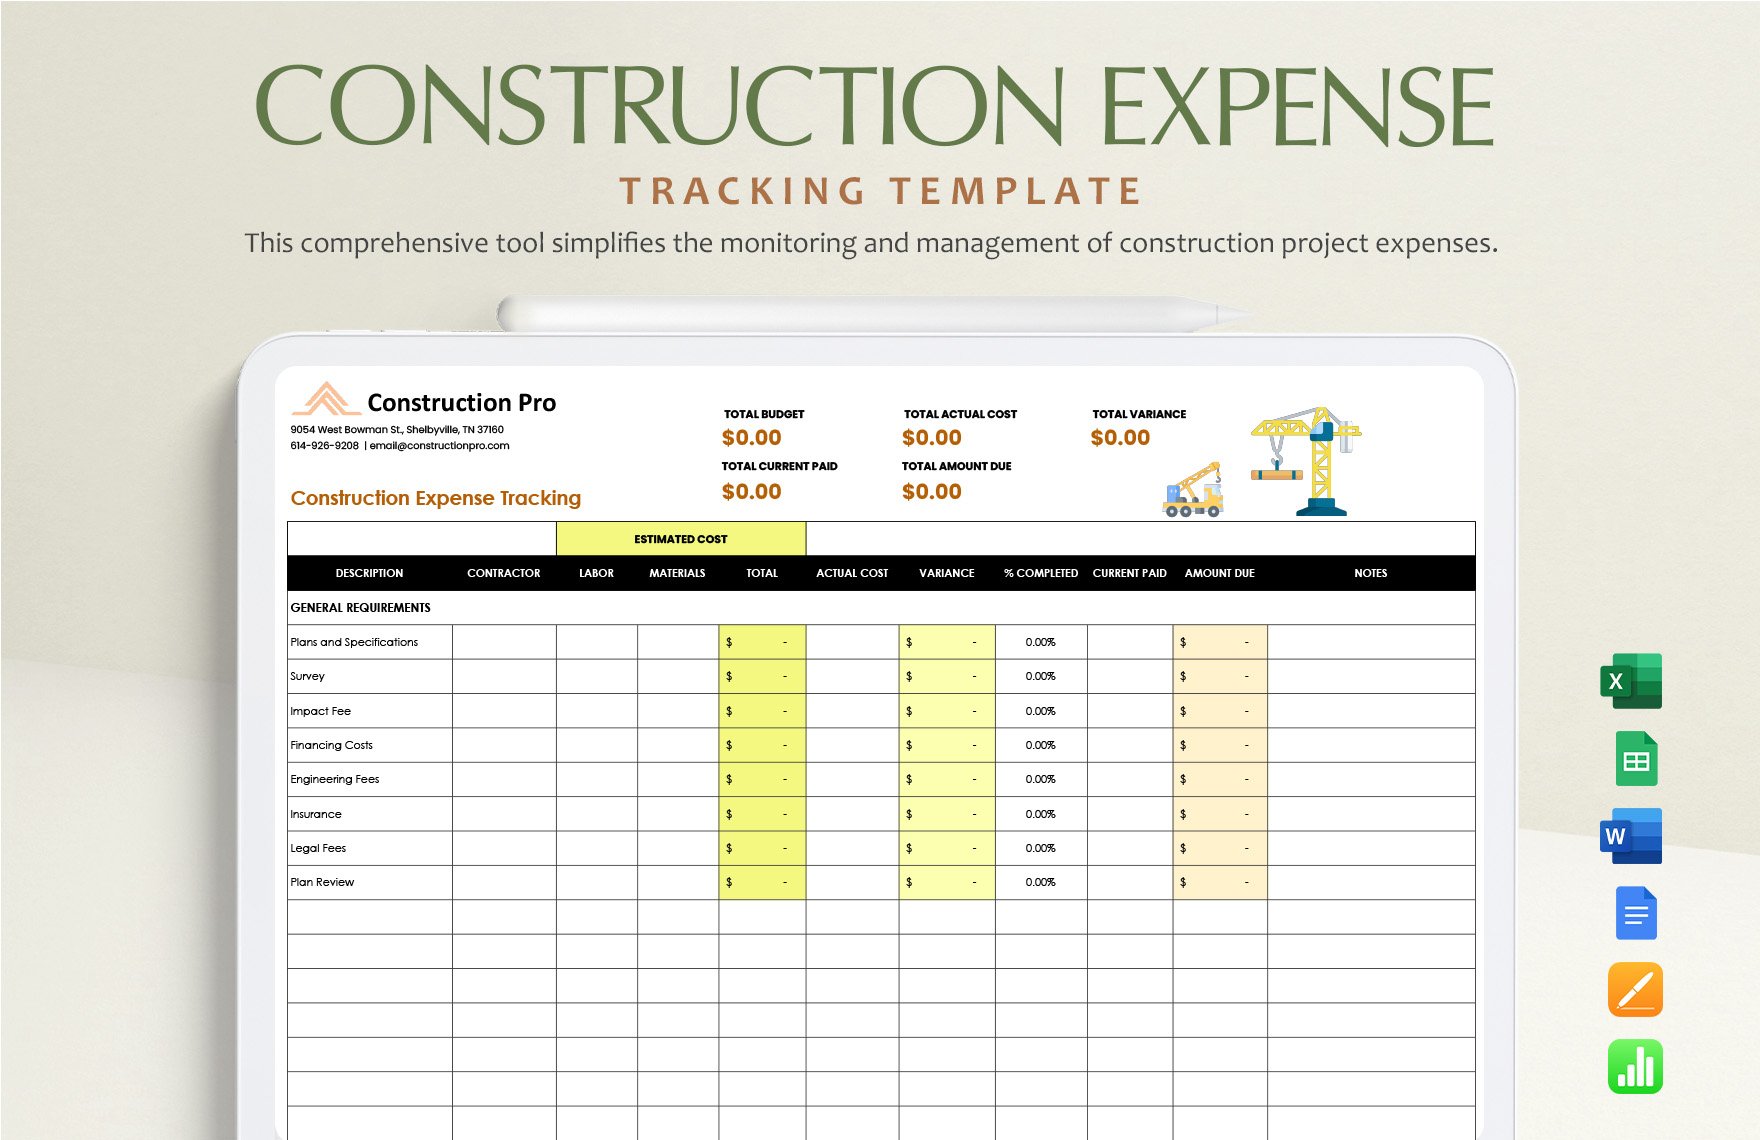 Construction Expense Tracking Template